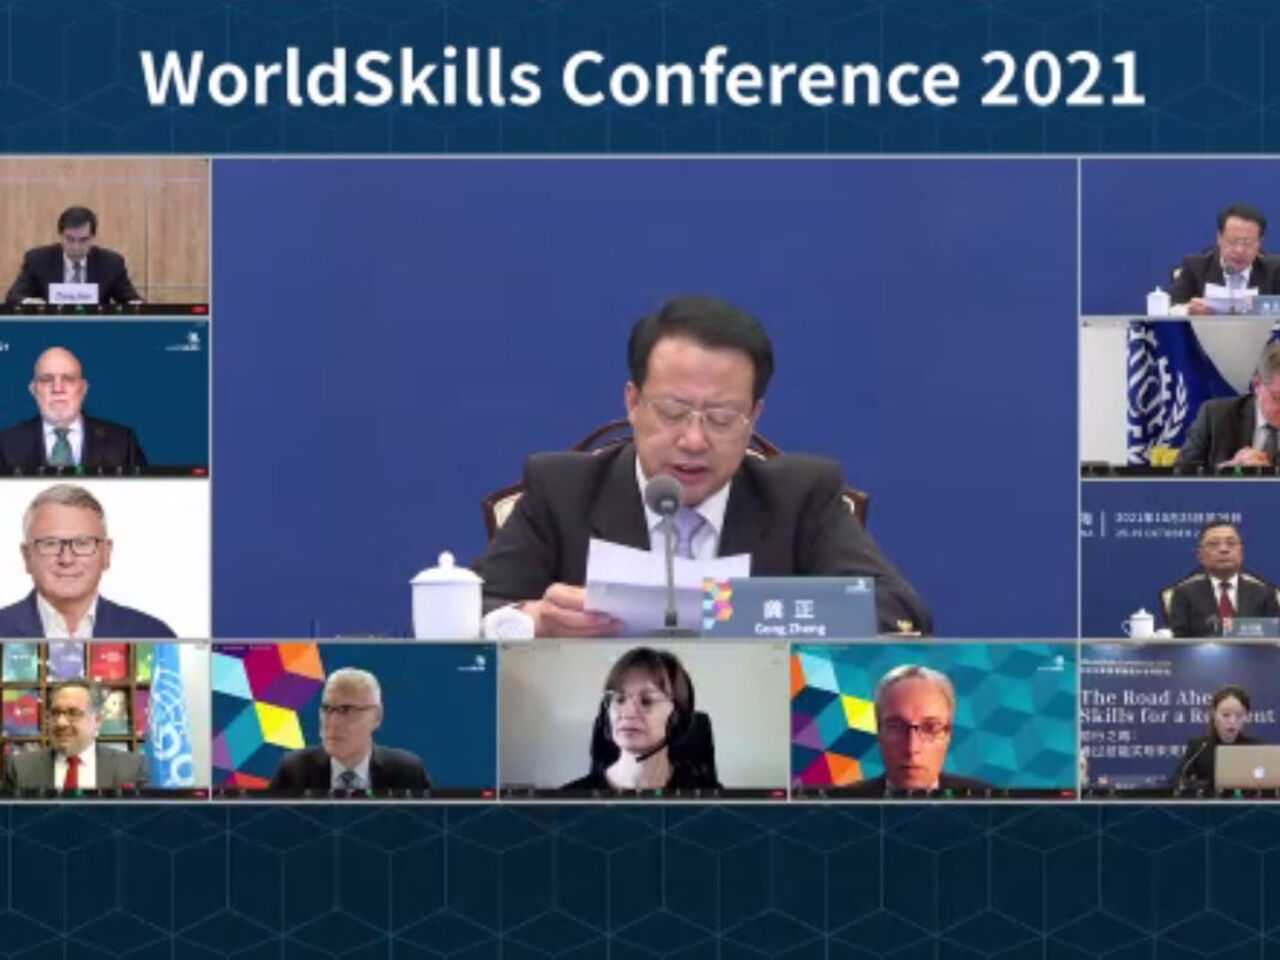 Launch of WorldSkills Conference 2021